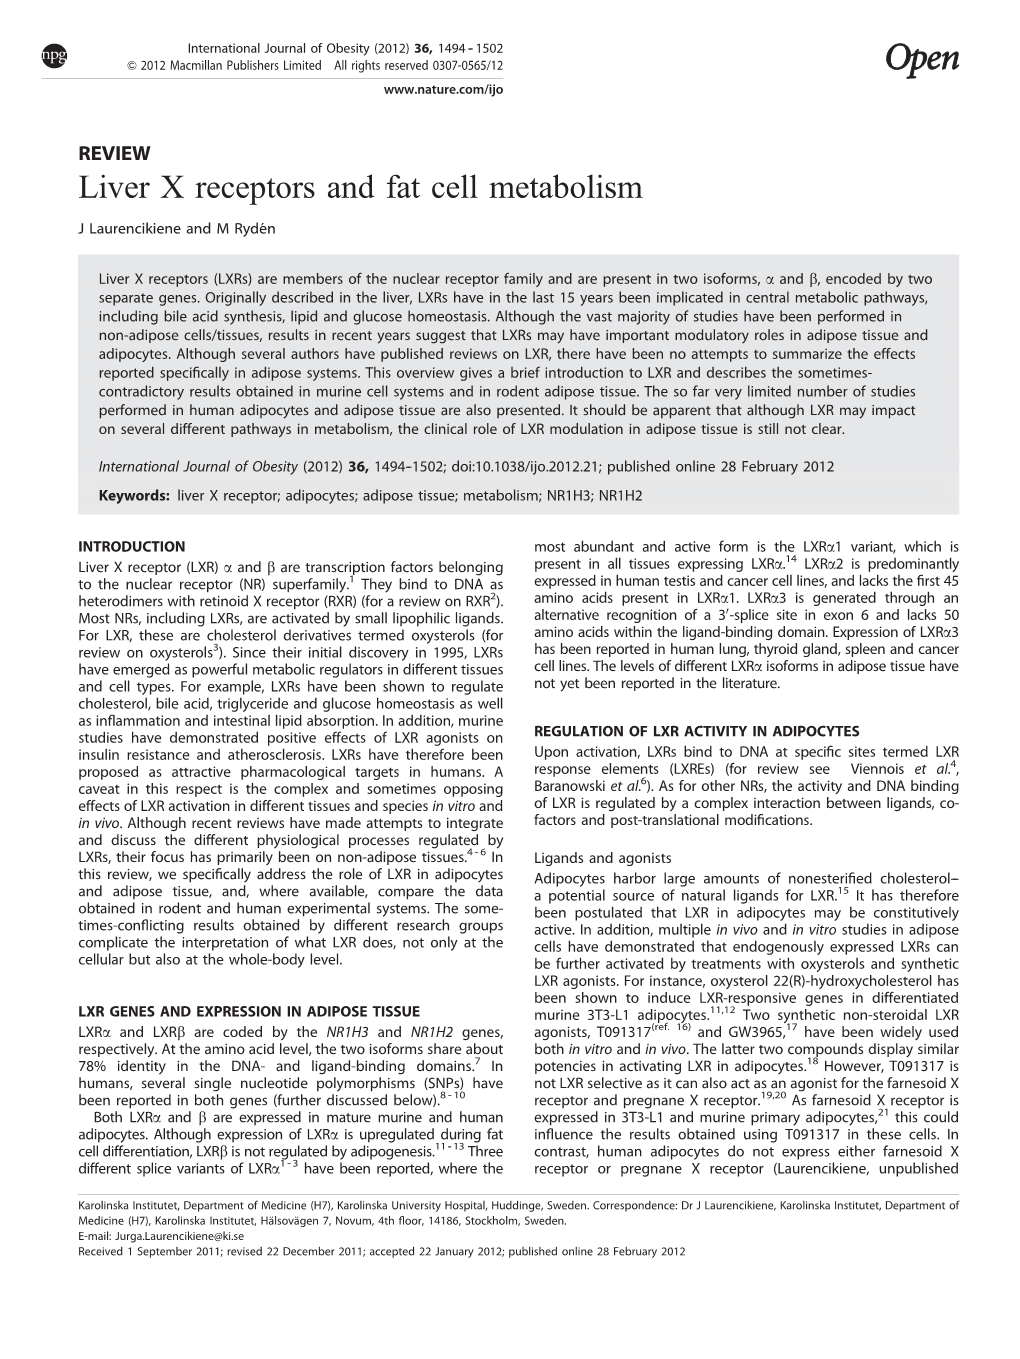 Liver X Receptors and Fat Cell Metabolism